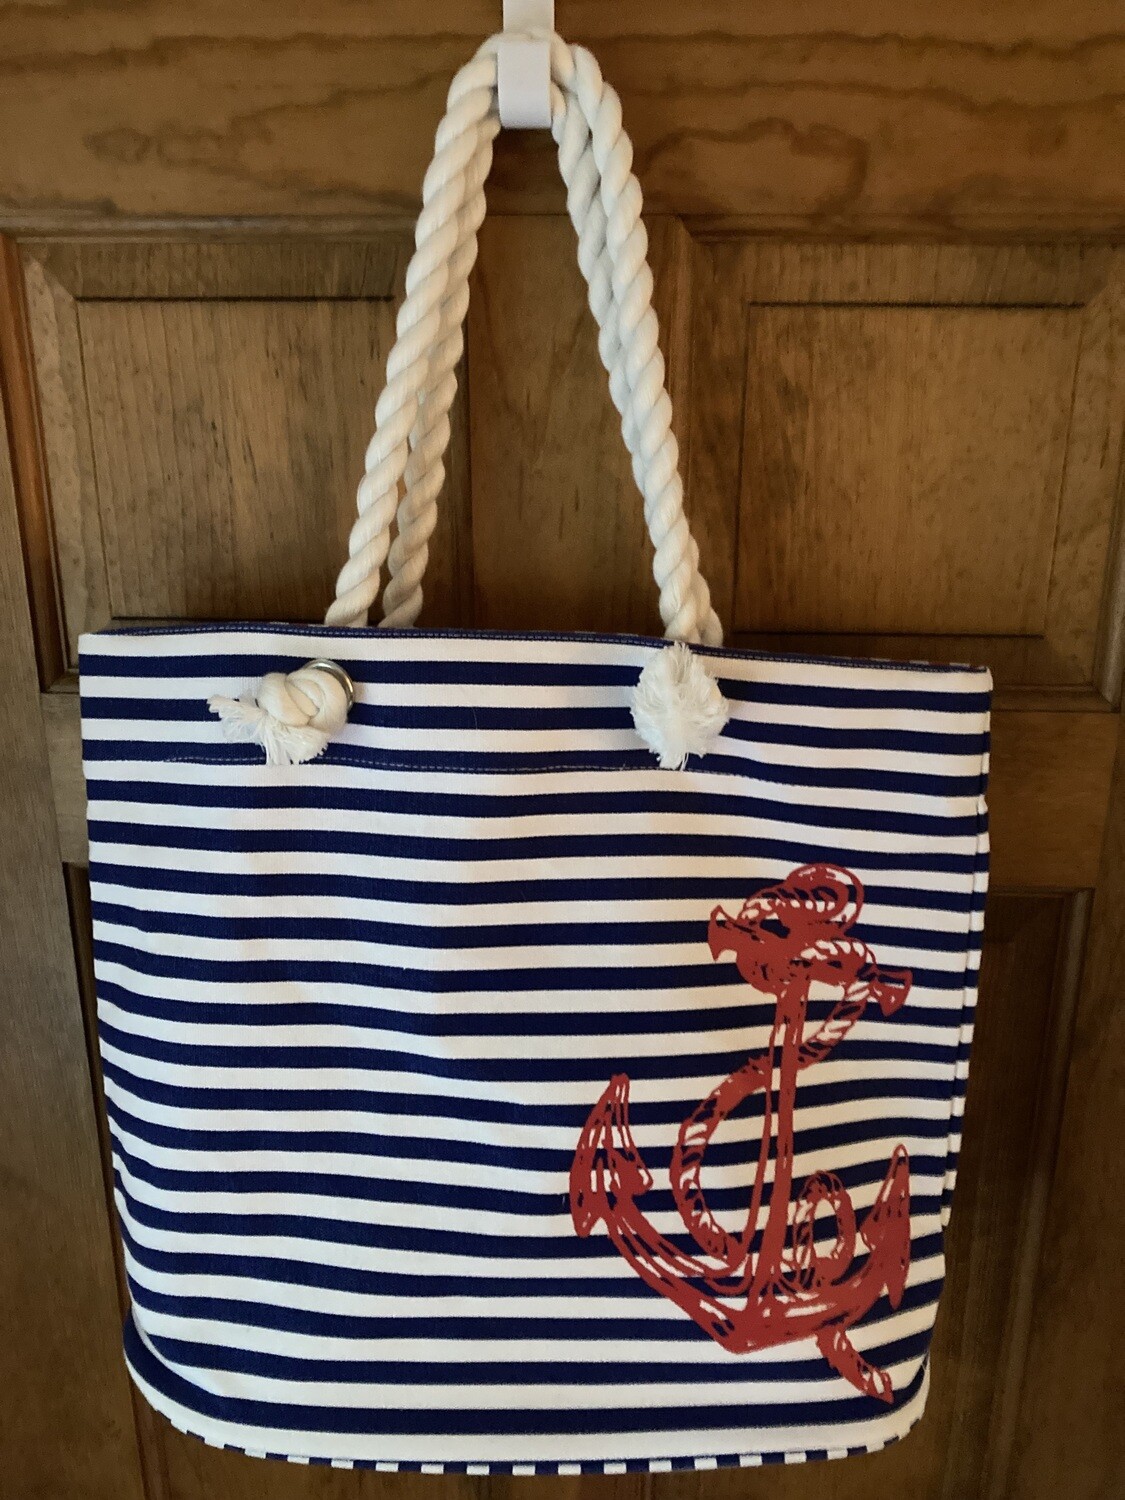 Punctuate Canvas Tote, Blue/White stripe w/ red anchor, #2314